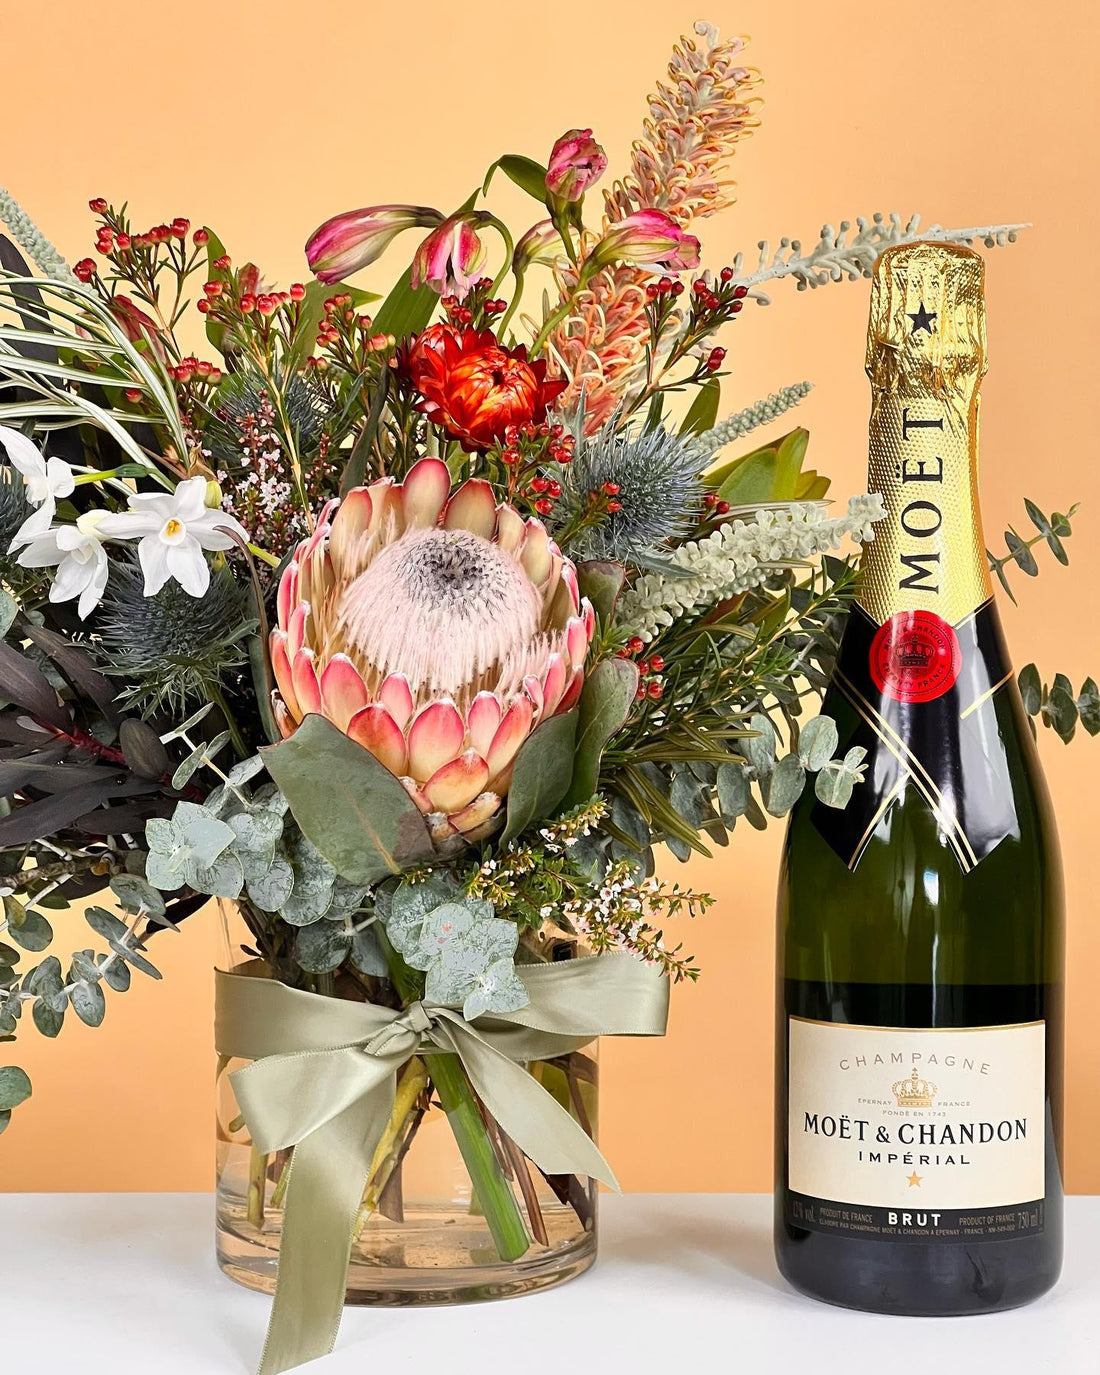 N A T I V E  P O S Y  B U N D L E 

Indulge with French Champagne and our Native Posy 🌿

Head to made with love by Flowers Gold Coast www.flowersgoldcoast.com.au the Gold Coast's best Florist